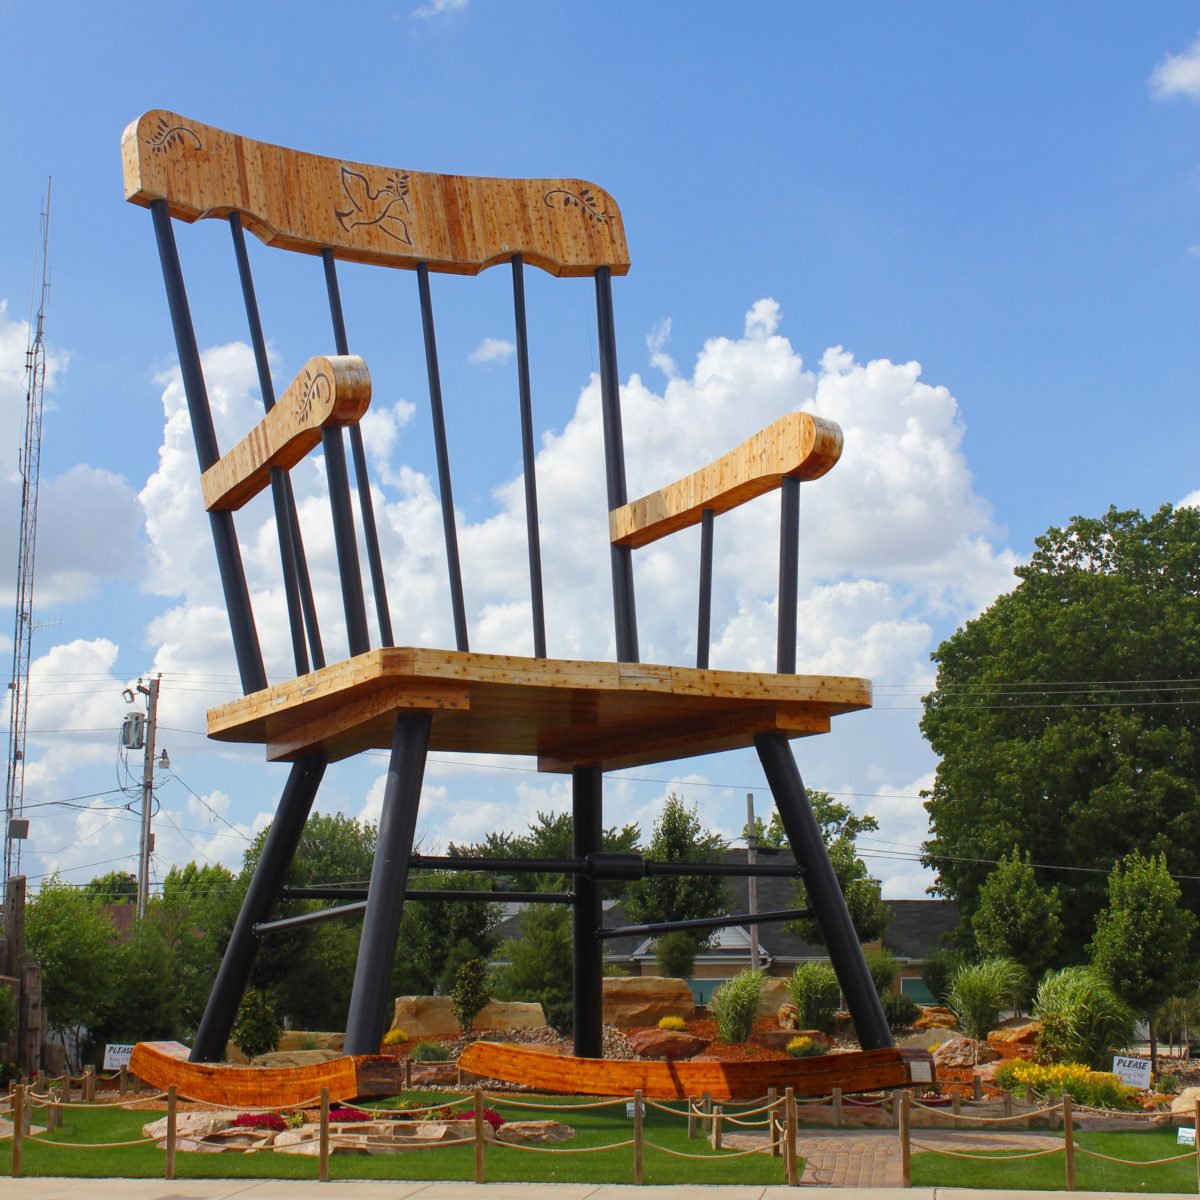 Exploring Wonders: Journey to the World’s Largest Rocking Chair插图3